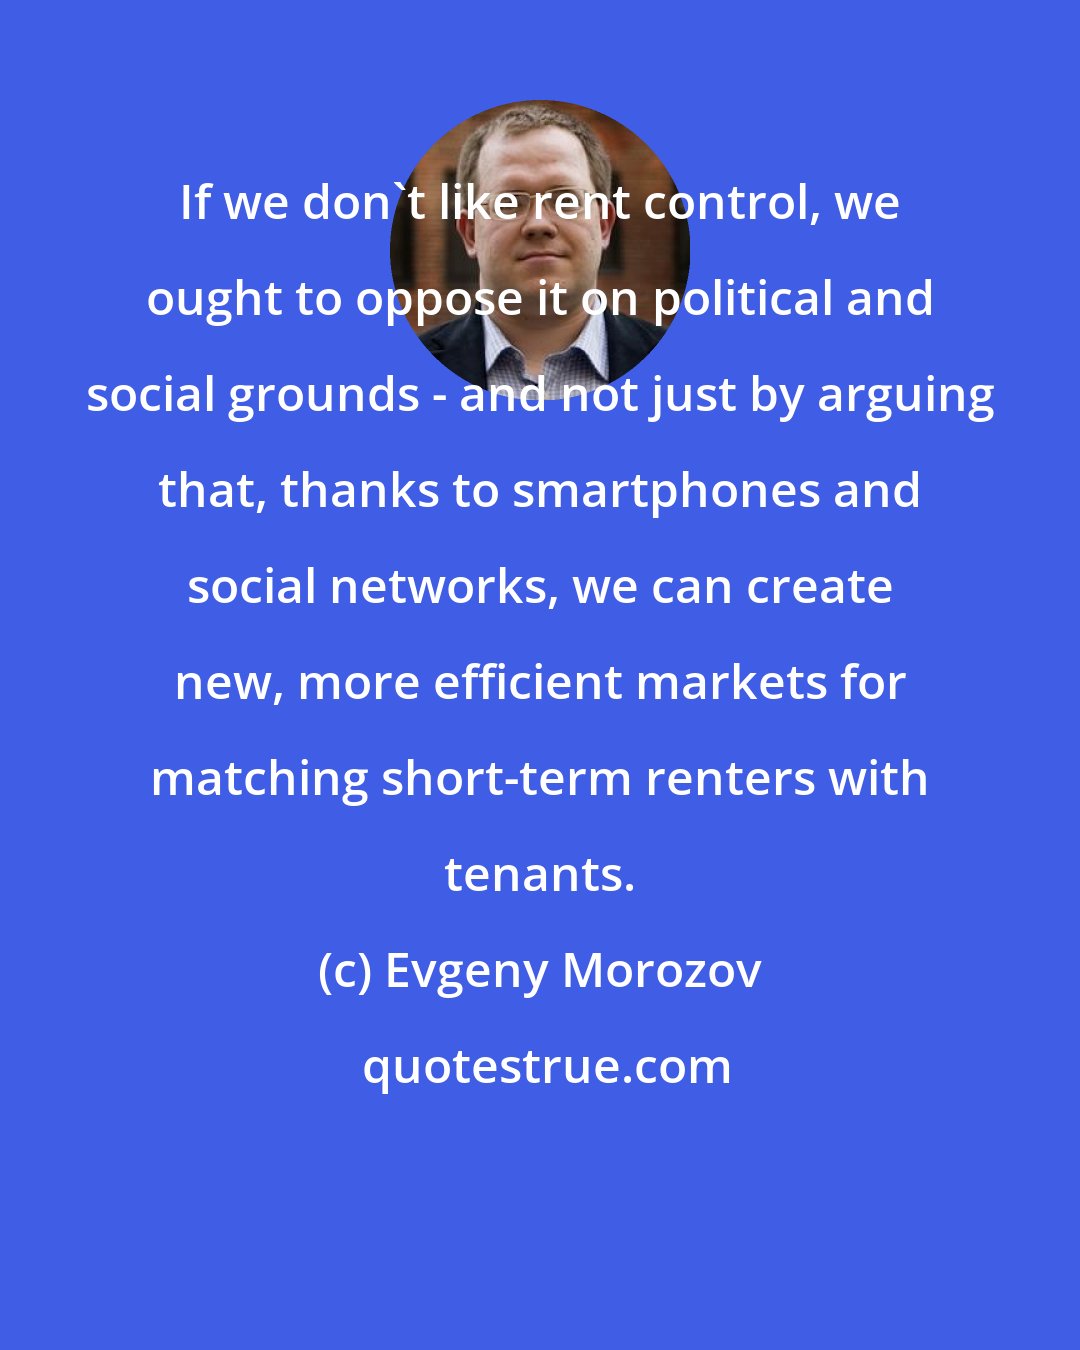 Evgeny Morozov: If we don't like rent control, we ought to oppose it on political and social grounds - and not just by arguing that, thanks to smartphones and social networks, we can create new, more efficient markets for matching short-term renters with tenants.